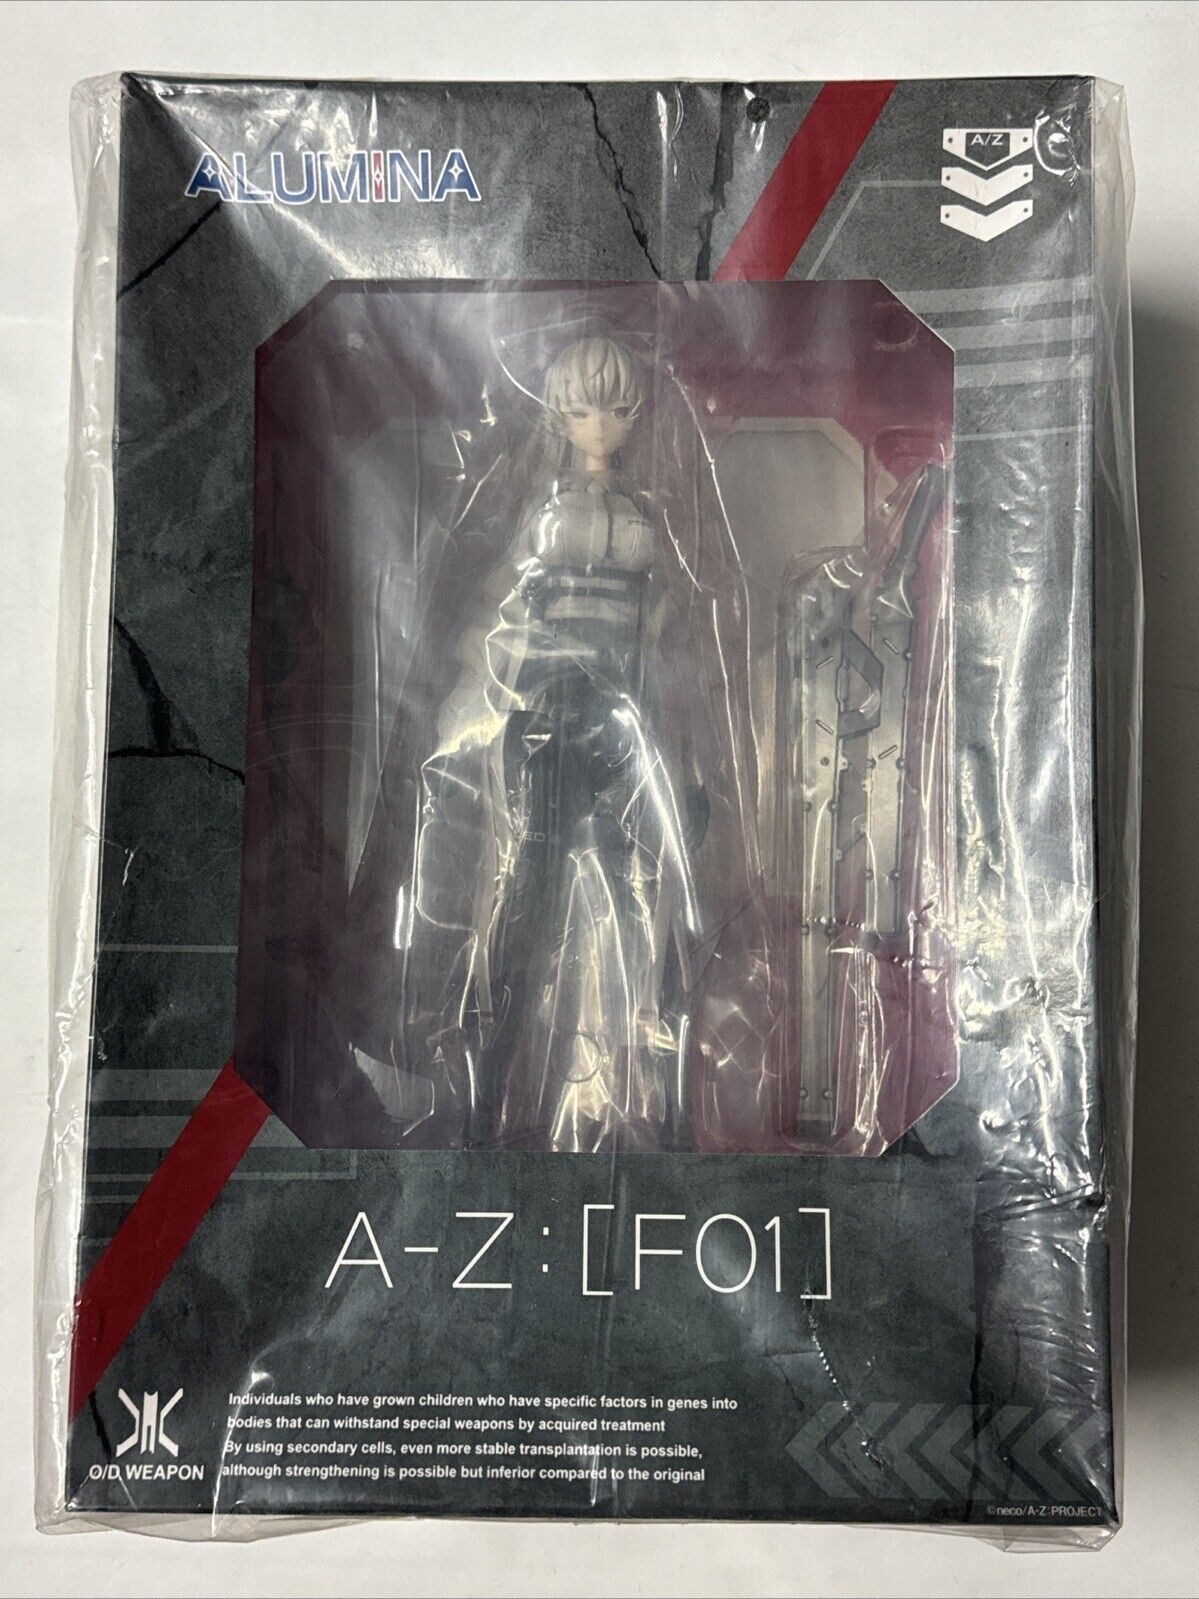 Alumina, A-Z:[F01], 1/7 Scale, O/D Weapon, Please Read Details